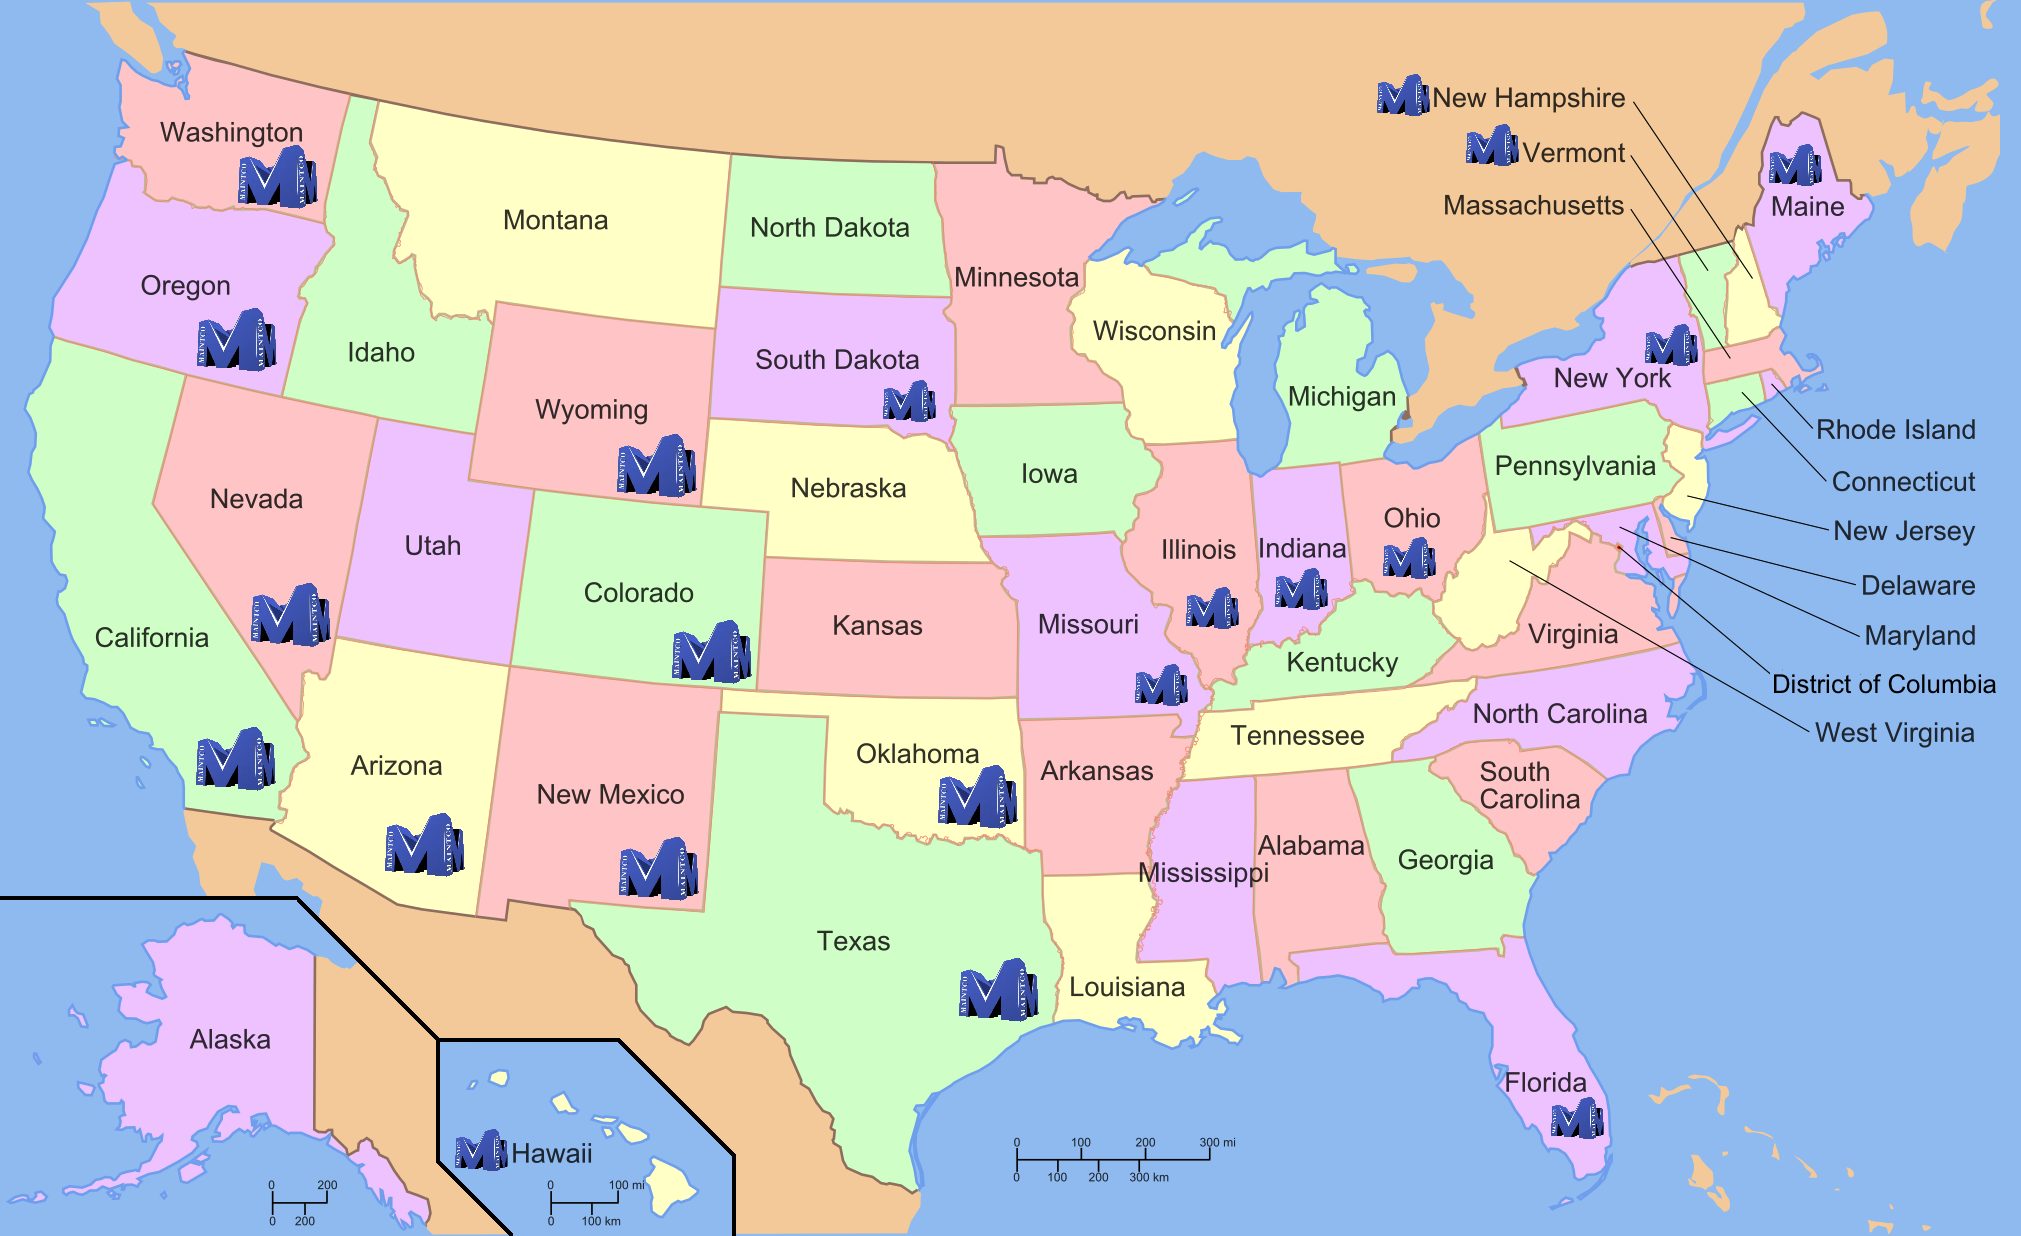 The map illustrates the extensive coverage of our construction services throughout the entire United States. The map showcases all 50 states, including Alaska and Hawaii. Each state is color-coded to indicate our presence and ability to provide construction services in that specific region. The map demonstrates our commitment to serving clients nationwide and highlights our capacity to undertake projects across various geographical areas. With a wide reach across the United States, we offer comprehensive construction solutions and expertise to clients in diverse locations, ensuring quality service and efficient project execution.